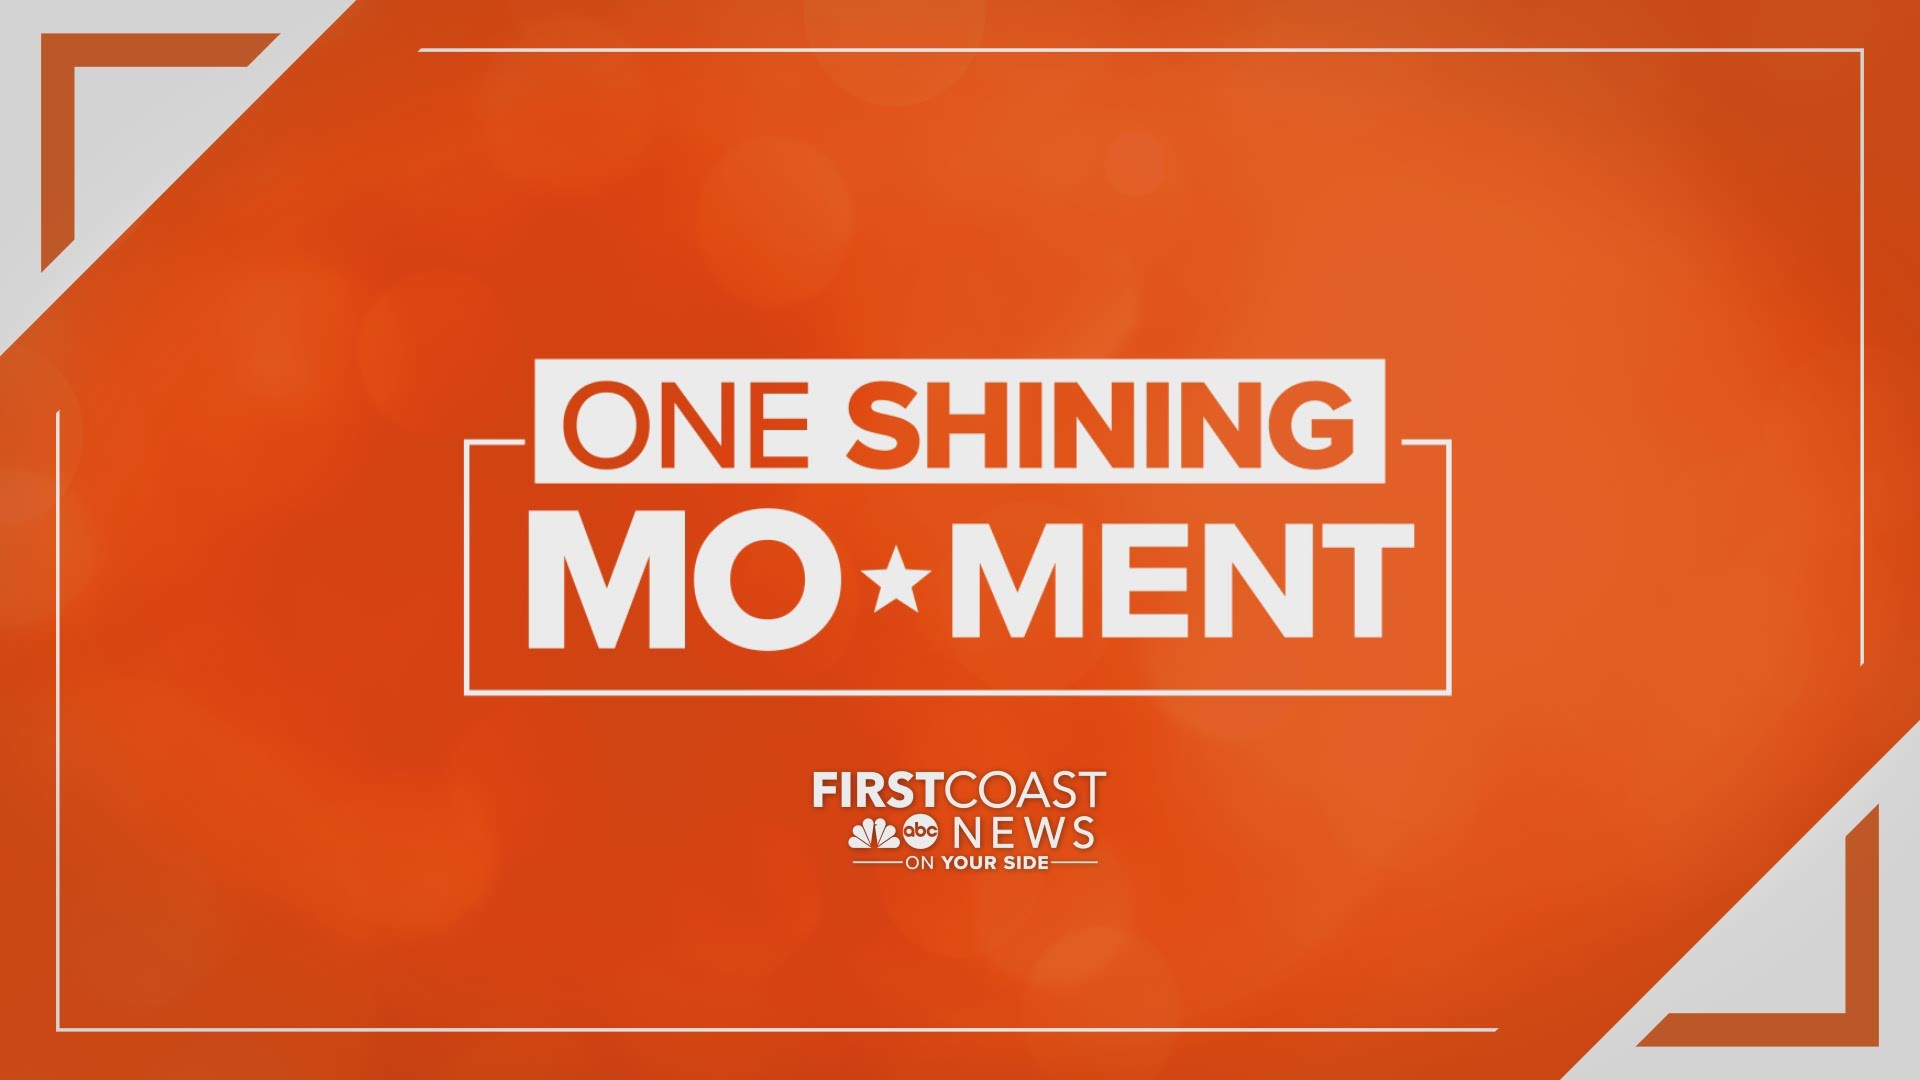 Former All-Pro running back Maurice Jones-Drew gives one life-long Jaguars' fan a surprise he'll never forget in this week's edition of "One Shining Mo*ment"